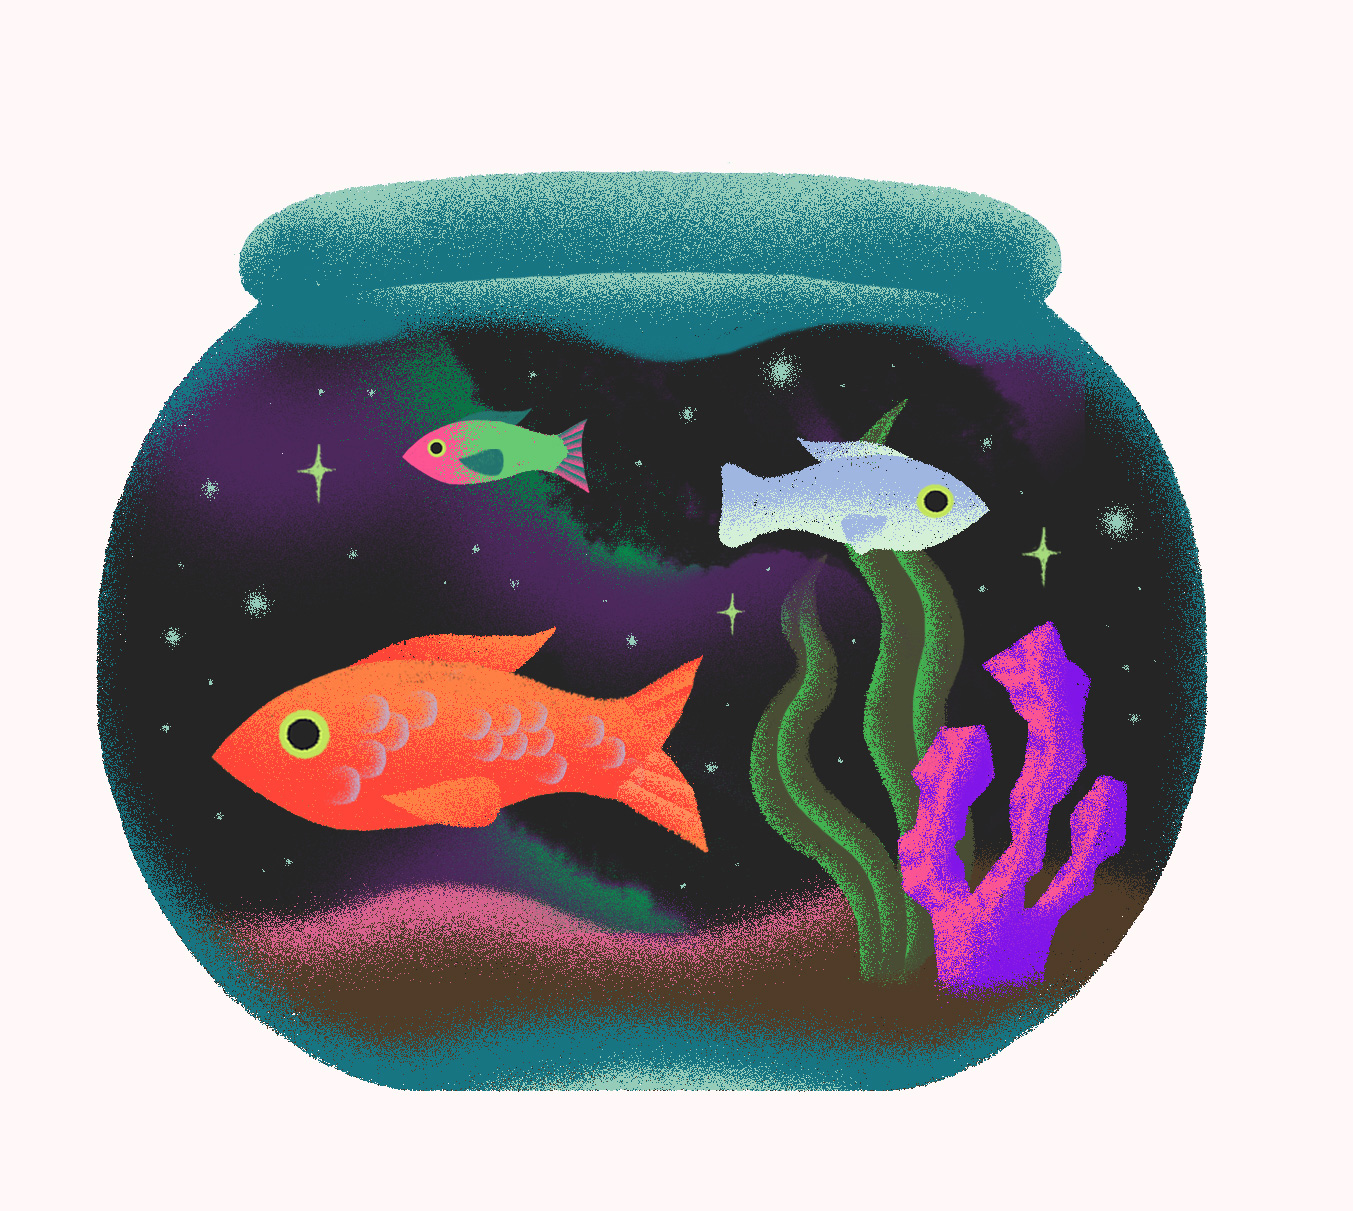 Fishbowl full of space